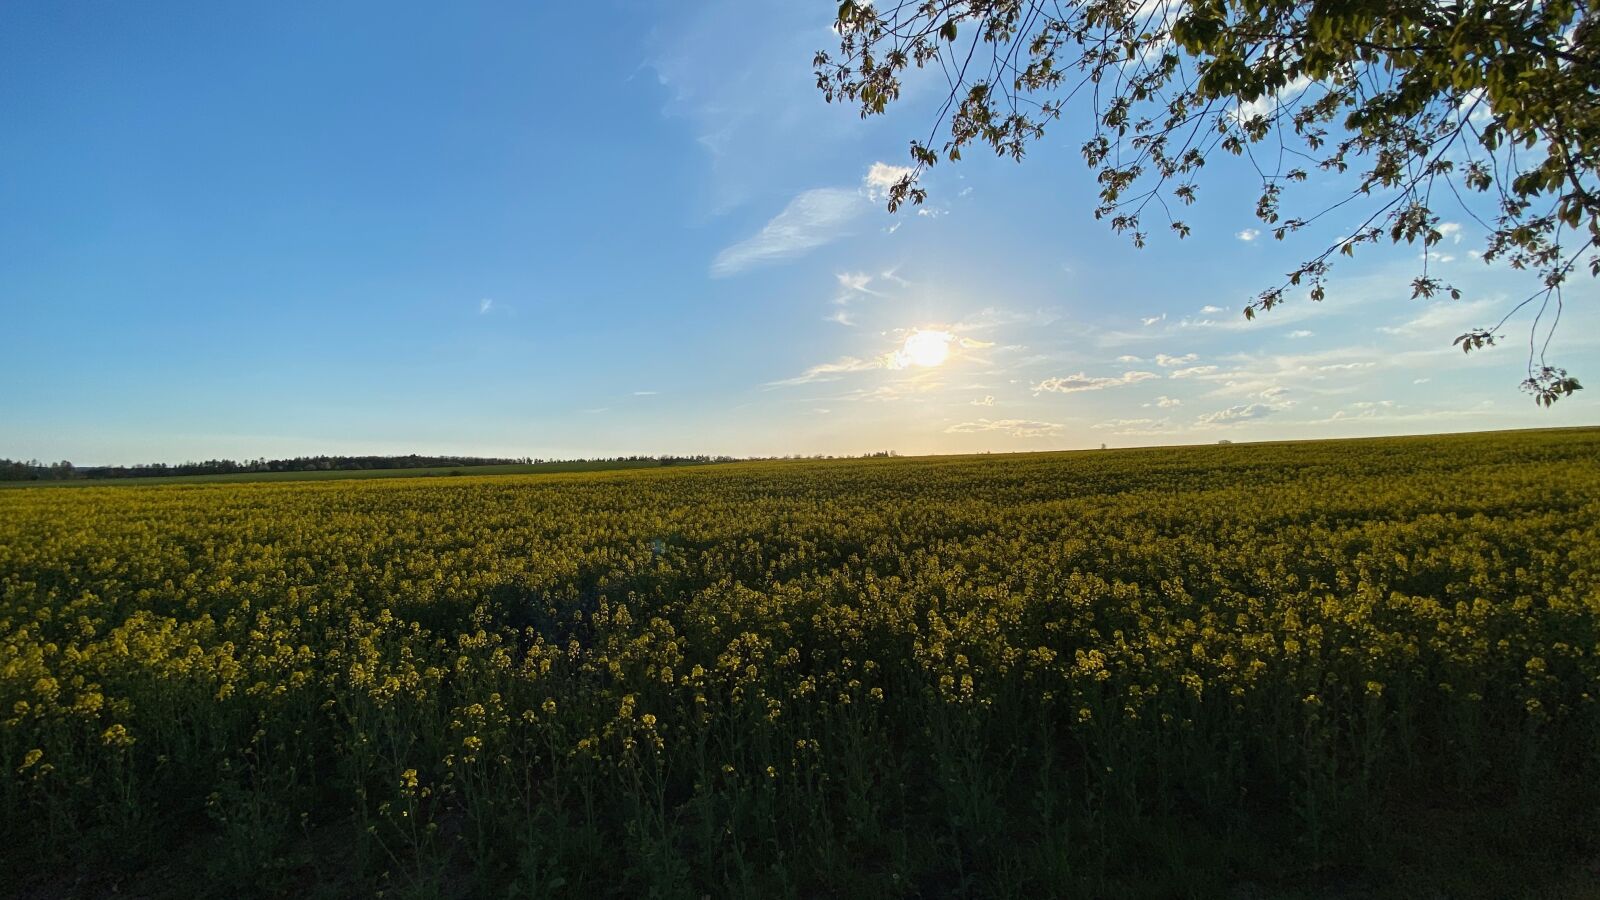 iPhone 11 Pro Max back triple camera 1.54mm f/2.4 sample photo. Backlighting, sunset, field photography